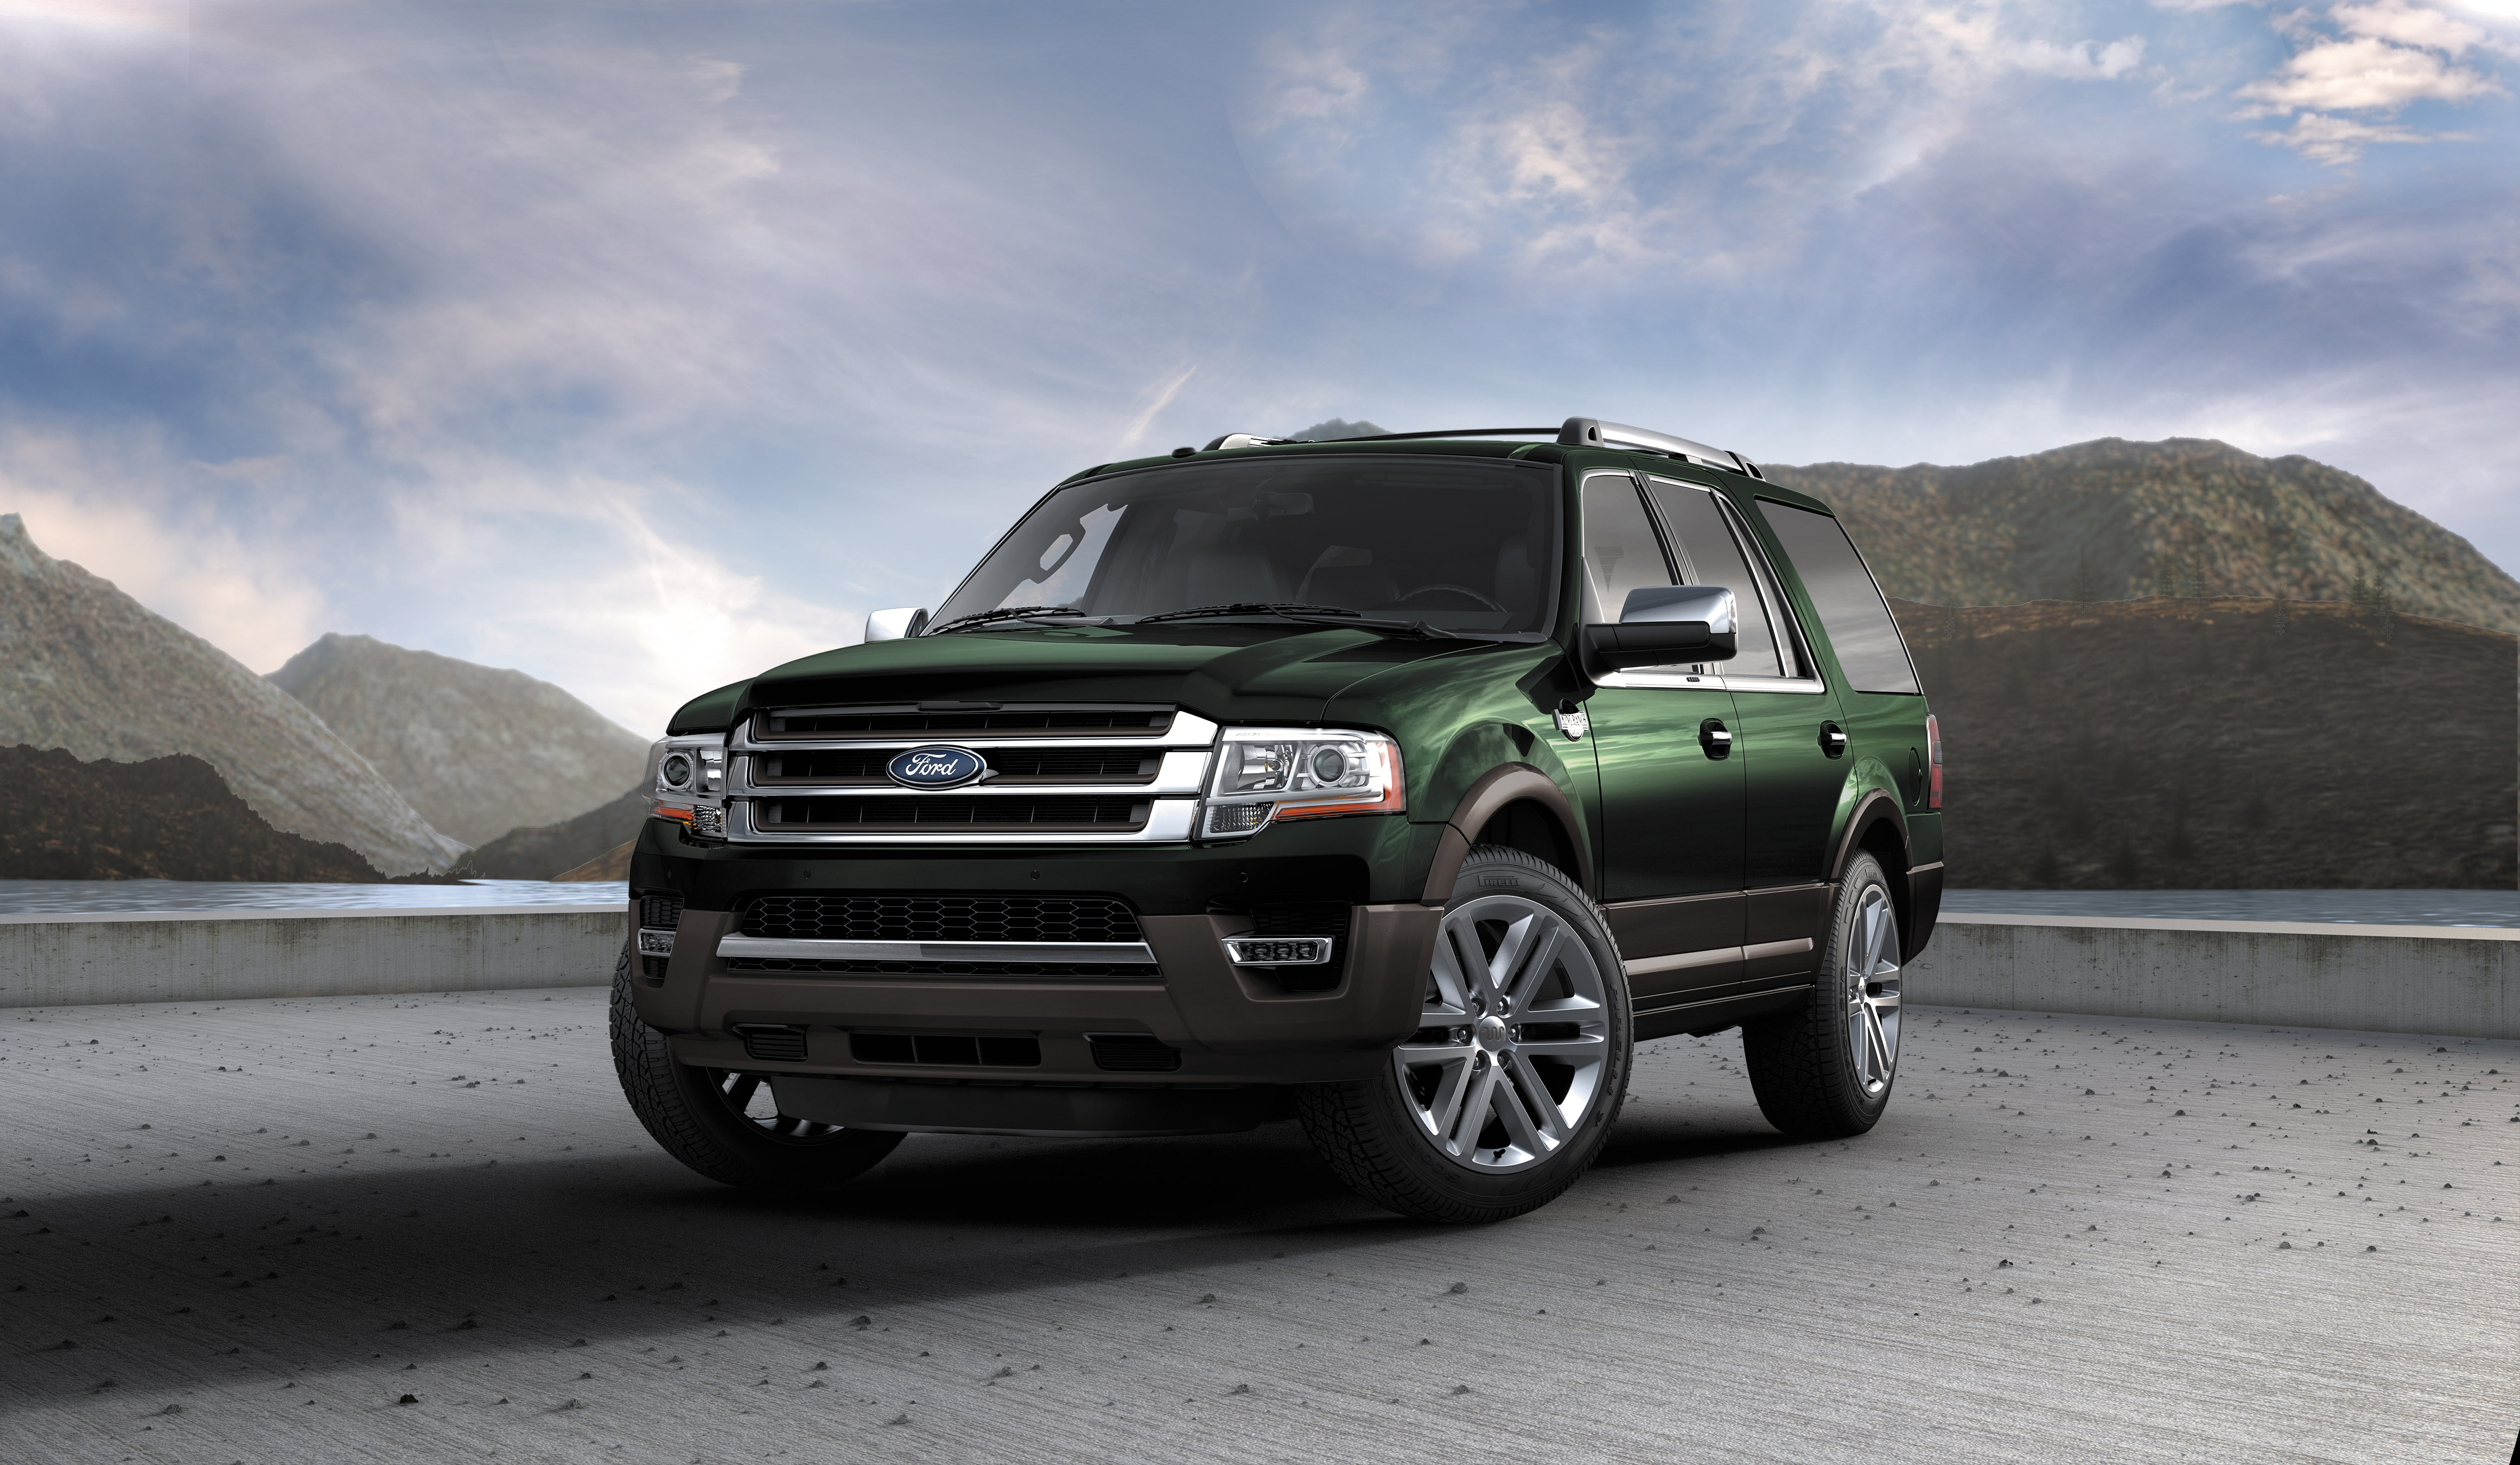 Ford Expedition hd restyling